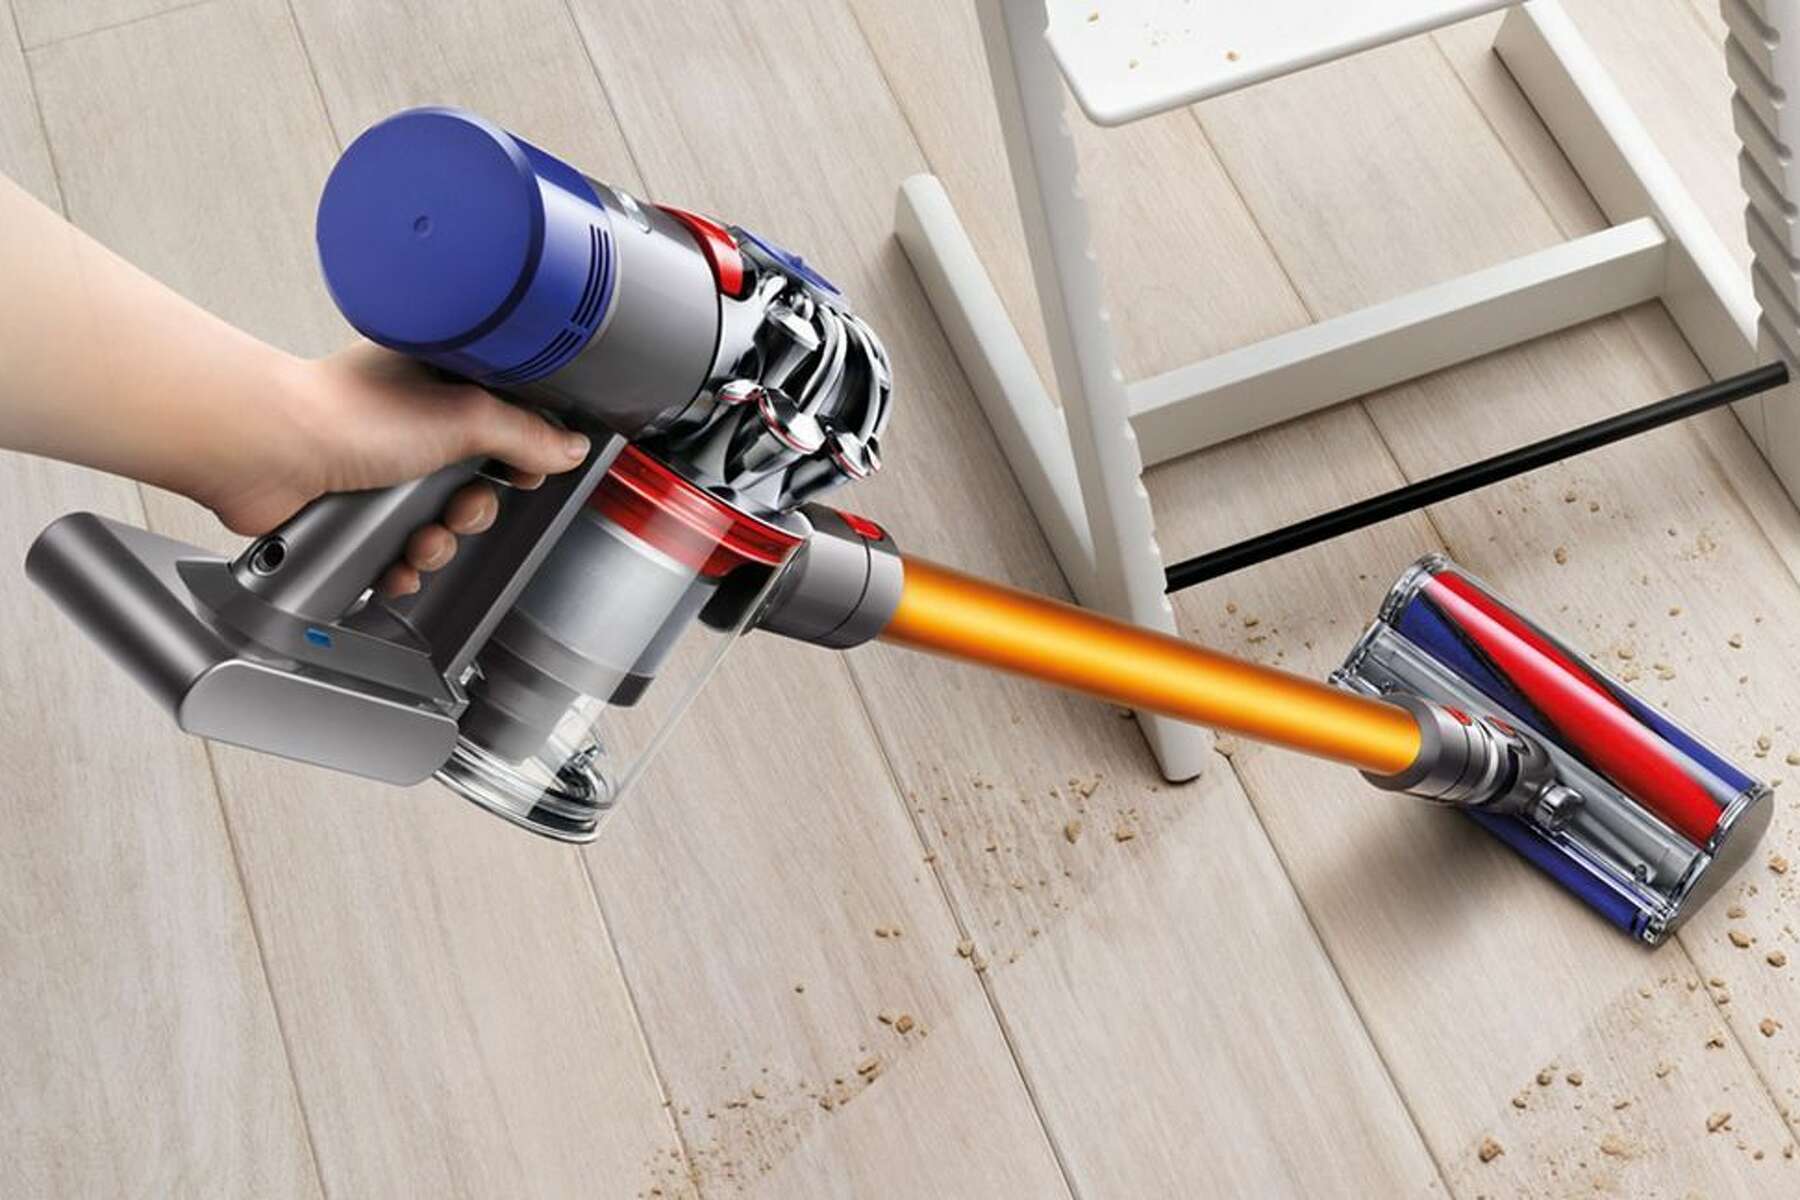 Get $100 Off A Dyson V8 Absolute Stick Vacuum For Memorial Day